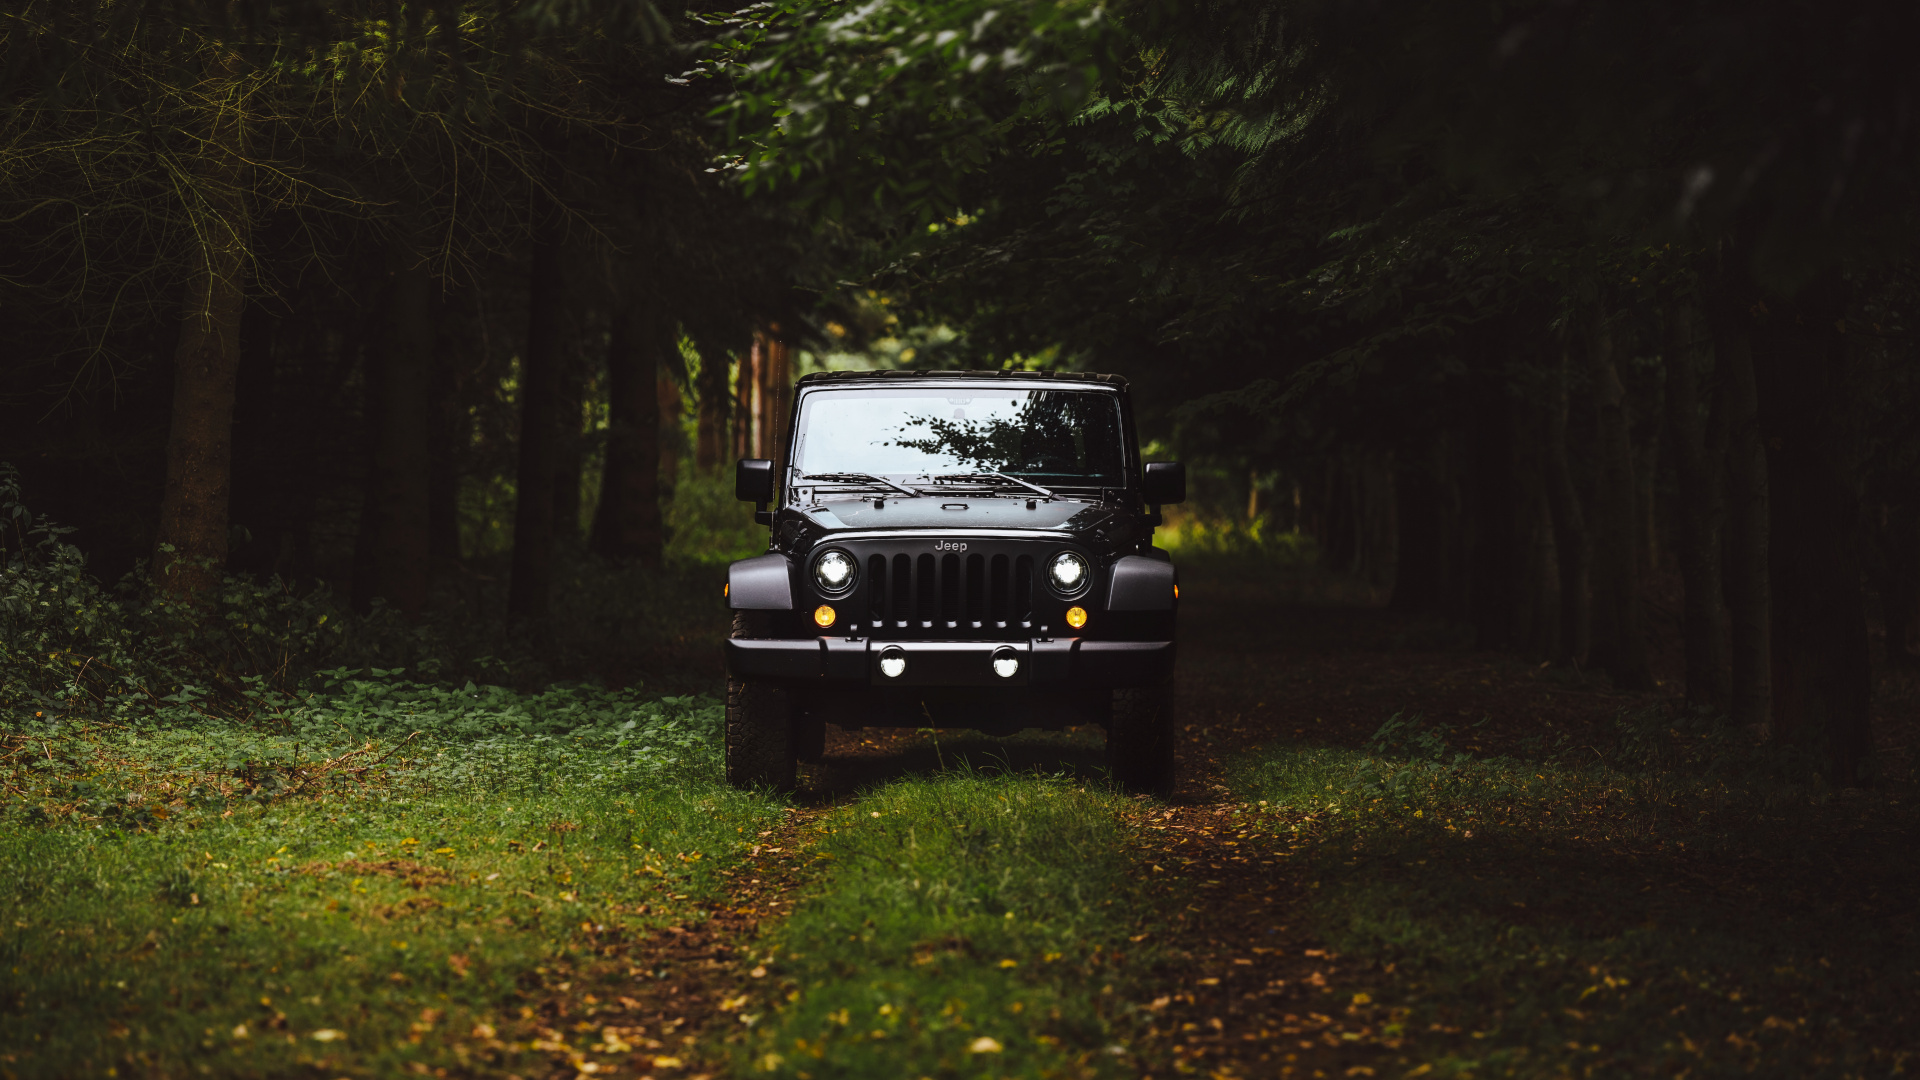 Black Jeep Wrangler on Green Grass Field Surrounded by Green Trees During Daytime. Wallpaper in 1920x1080 Resolution